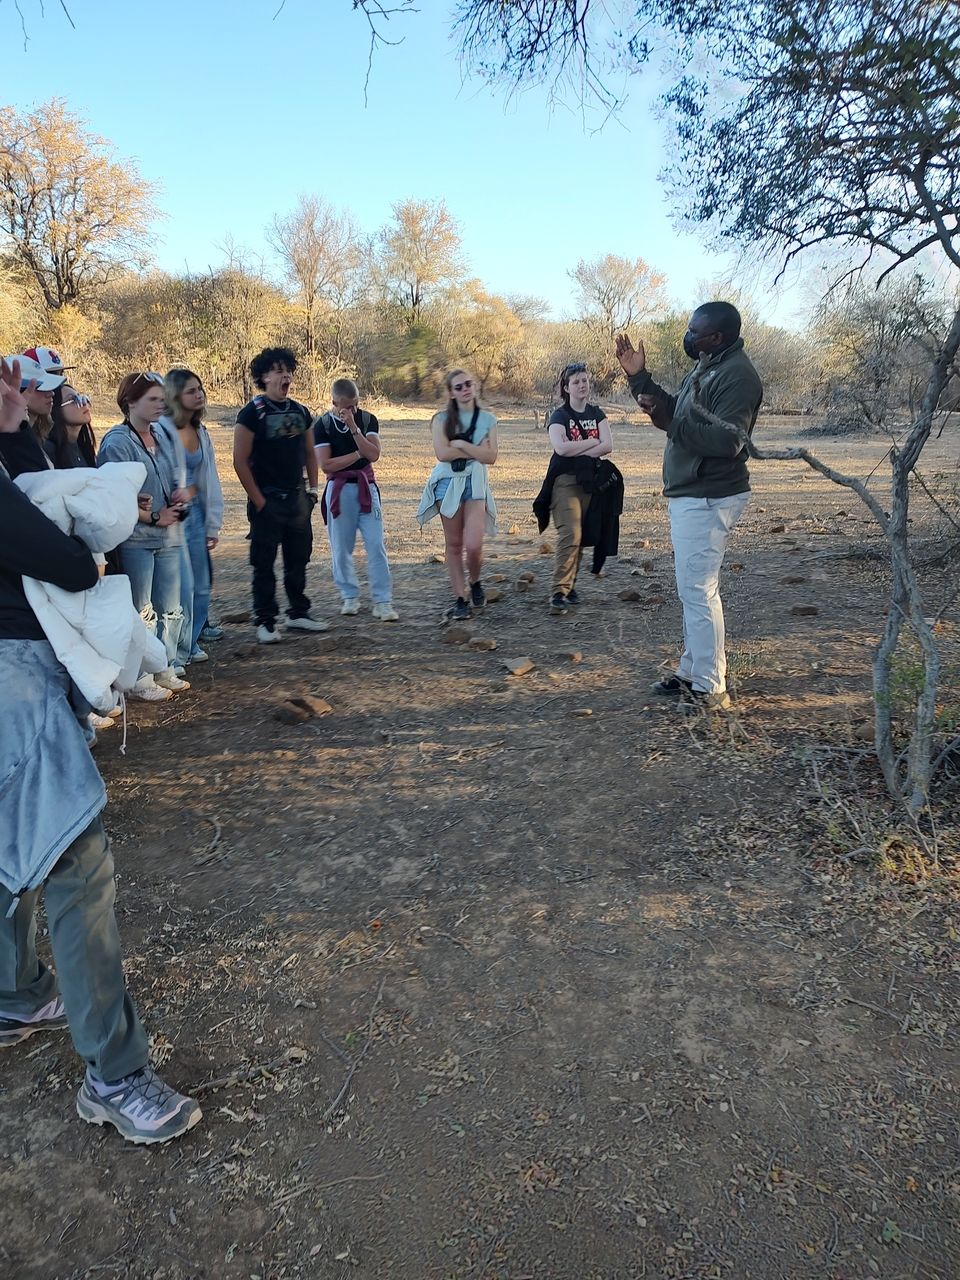 Our nature expert Dusani teaching in the field.